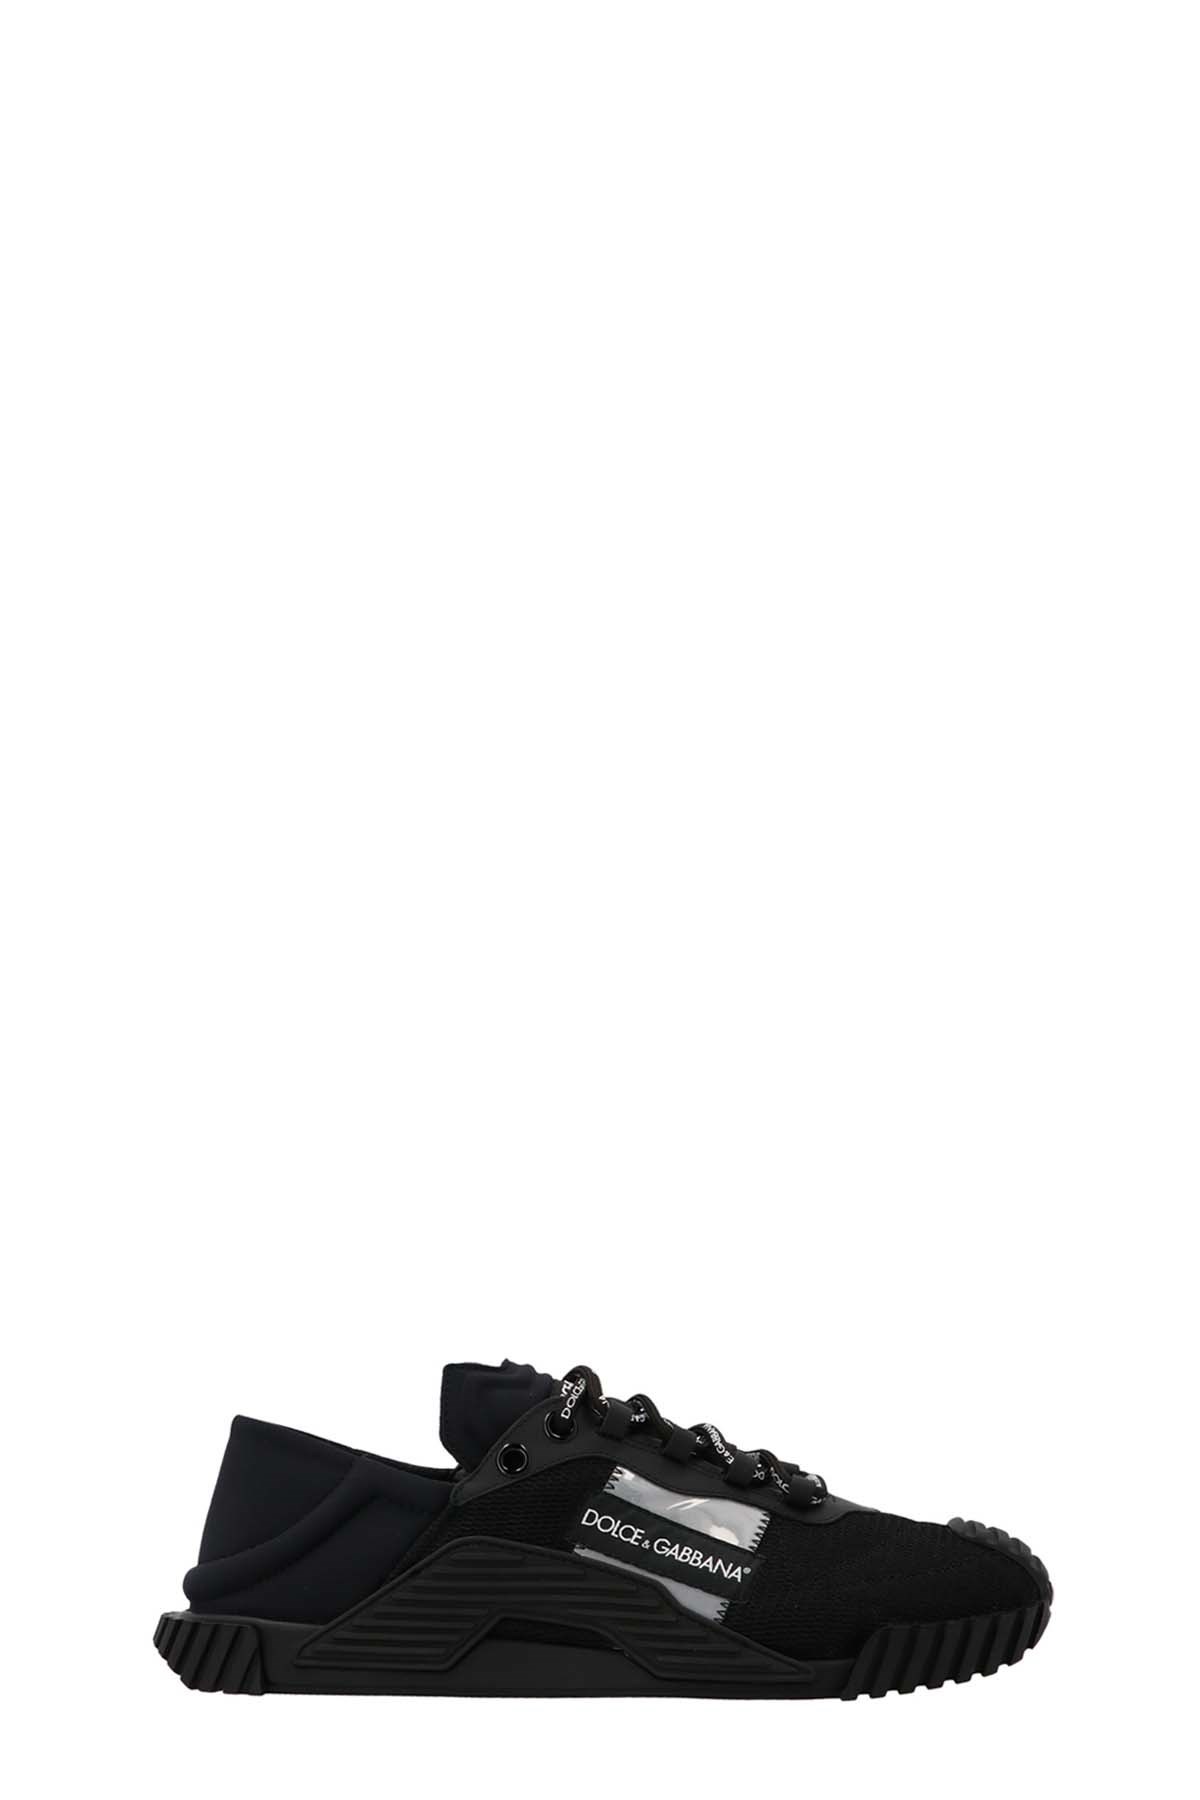 DOLCE & GABBANA 'Ns1' Sneakers